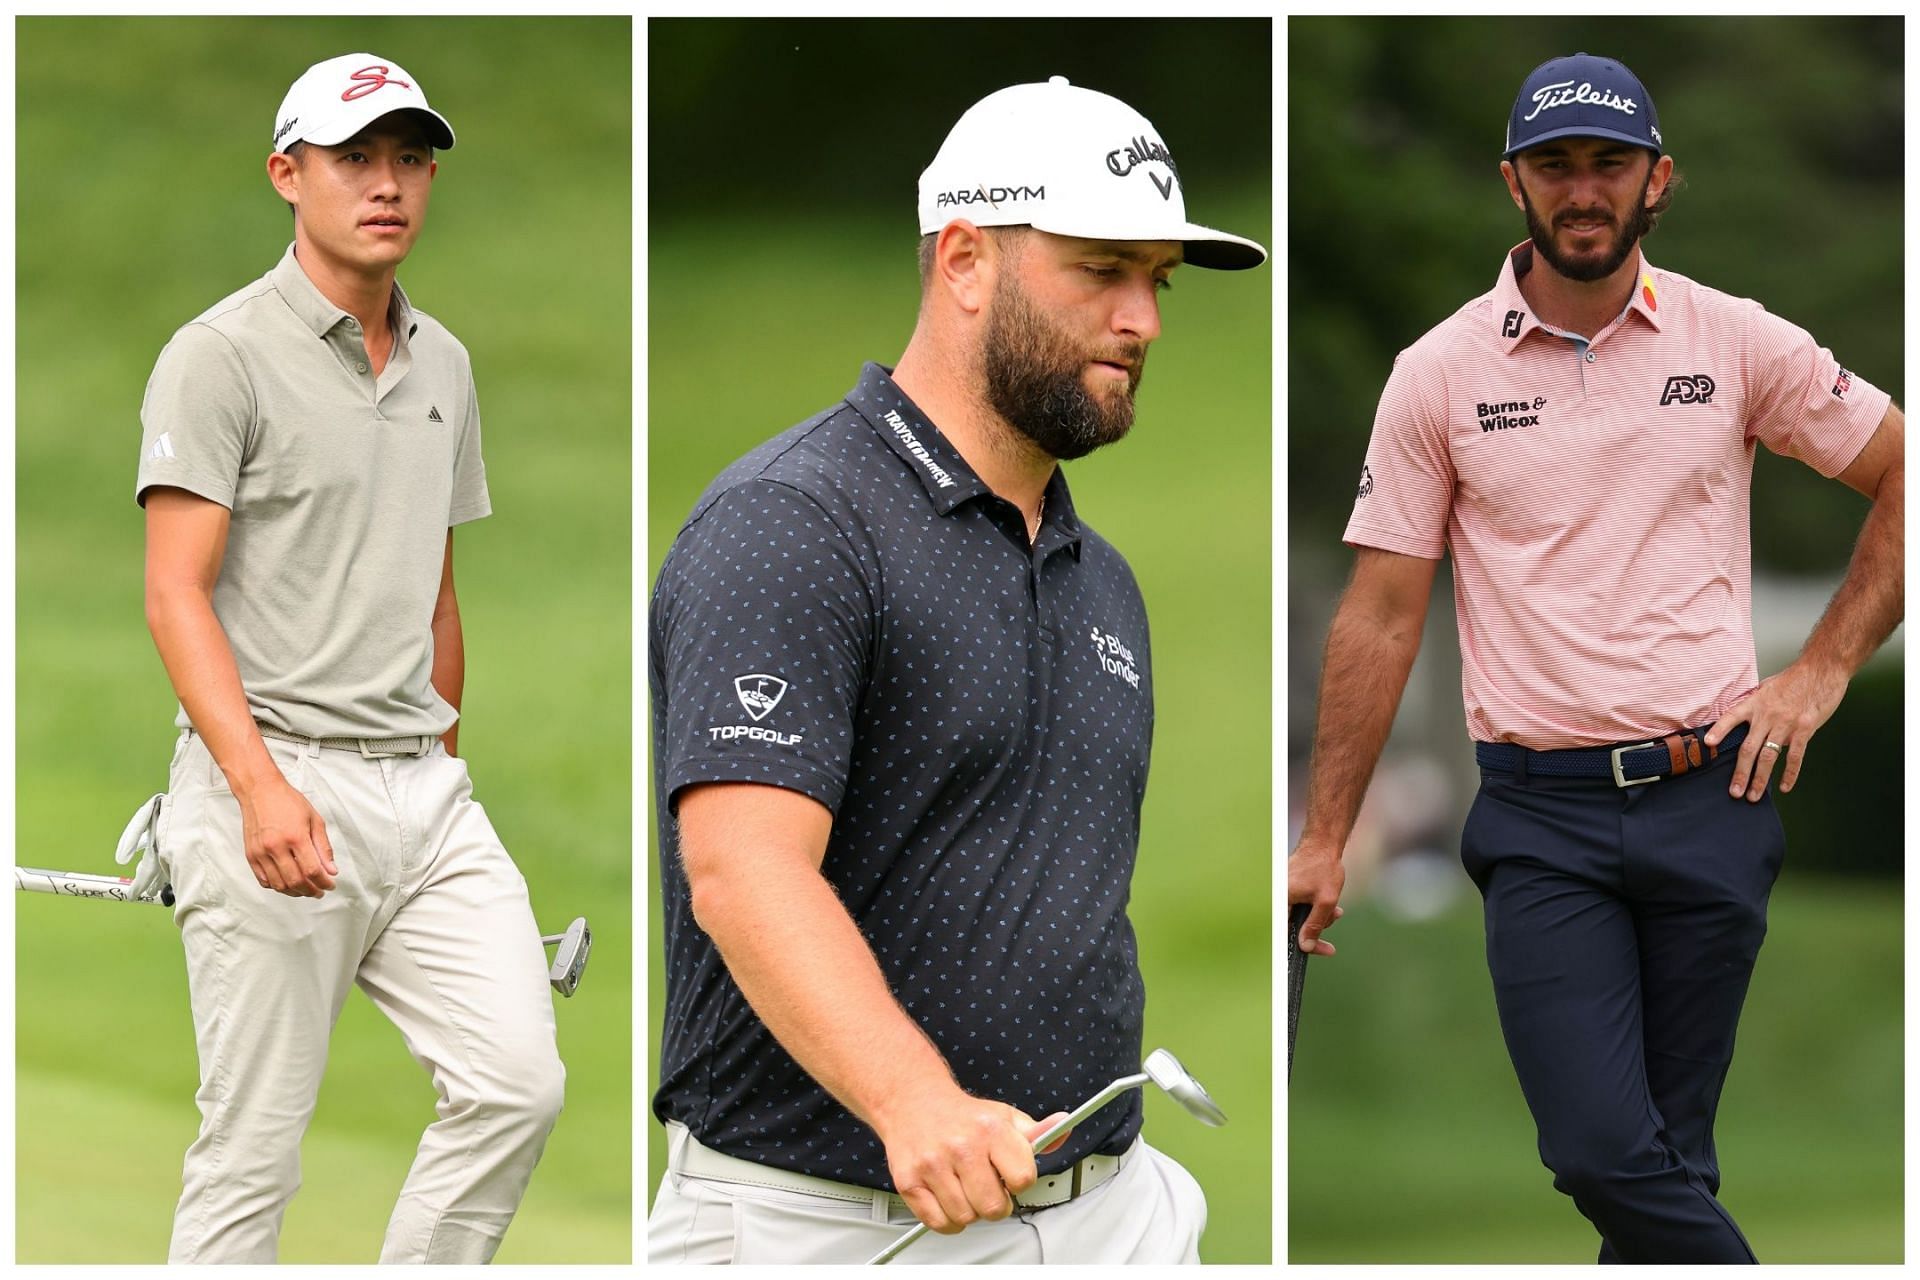 Travelers Championship witnessed surprise exit of some of the biggest names in professional golf